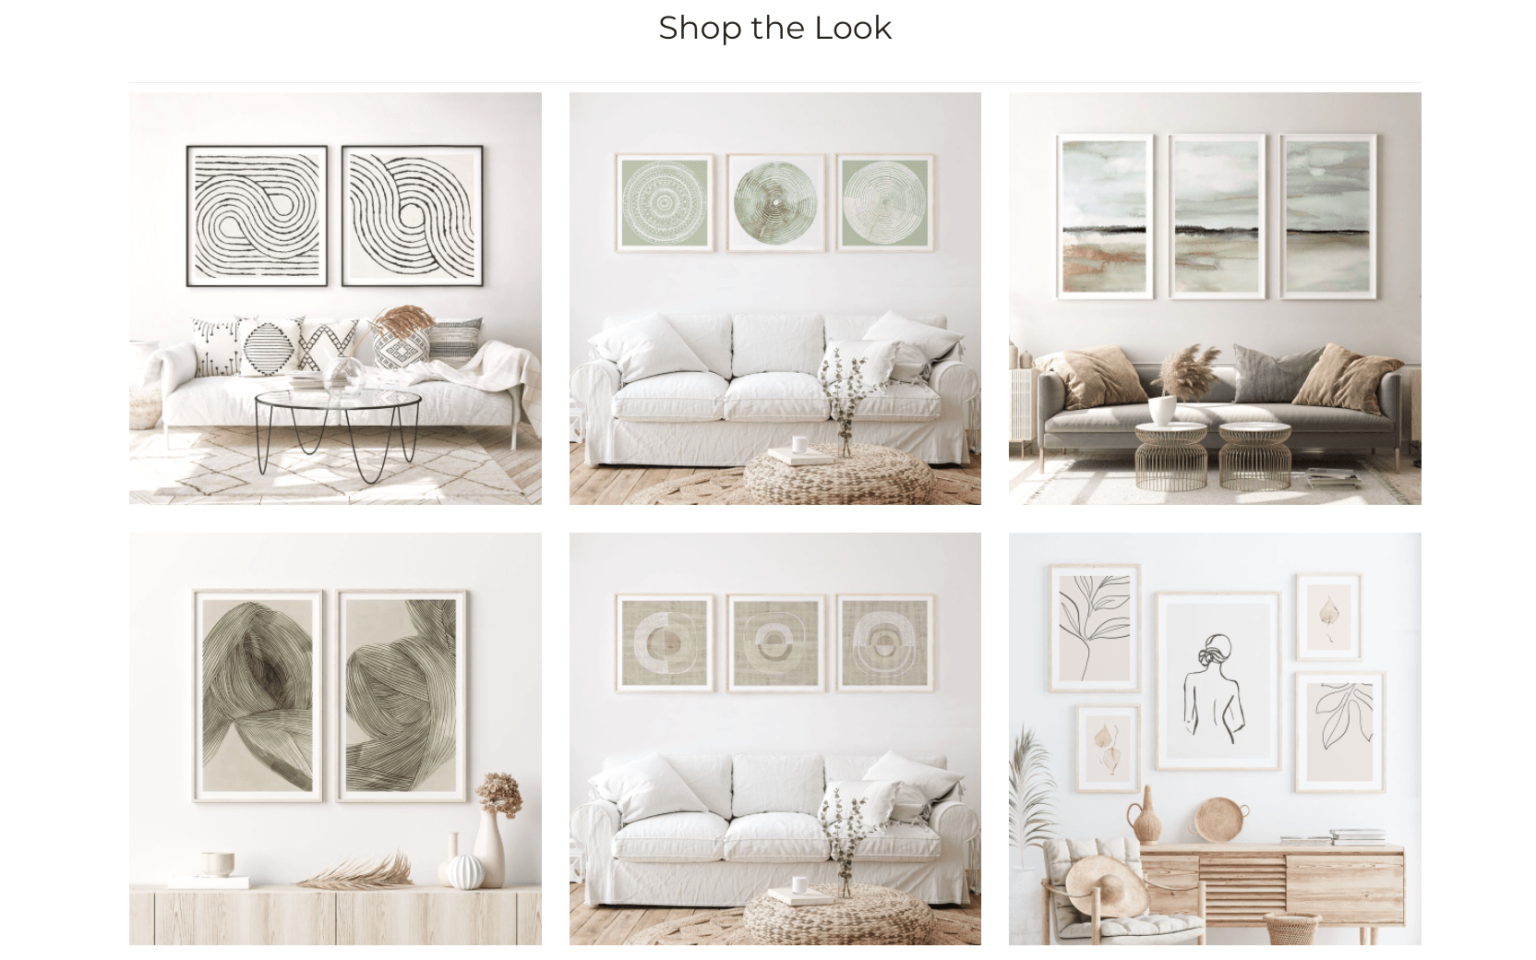 Best Shopify Stores for Home Decor: 9 Inspiring Stores for Home Decor